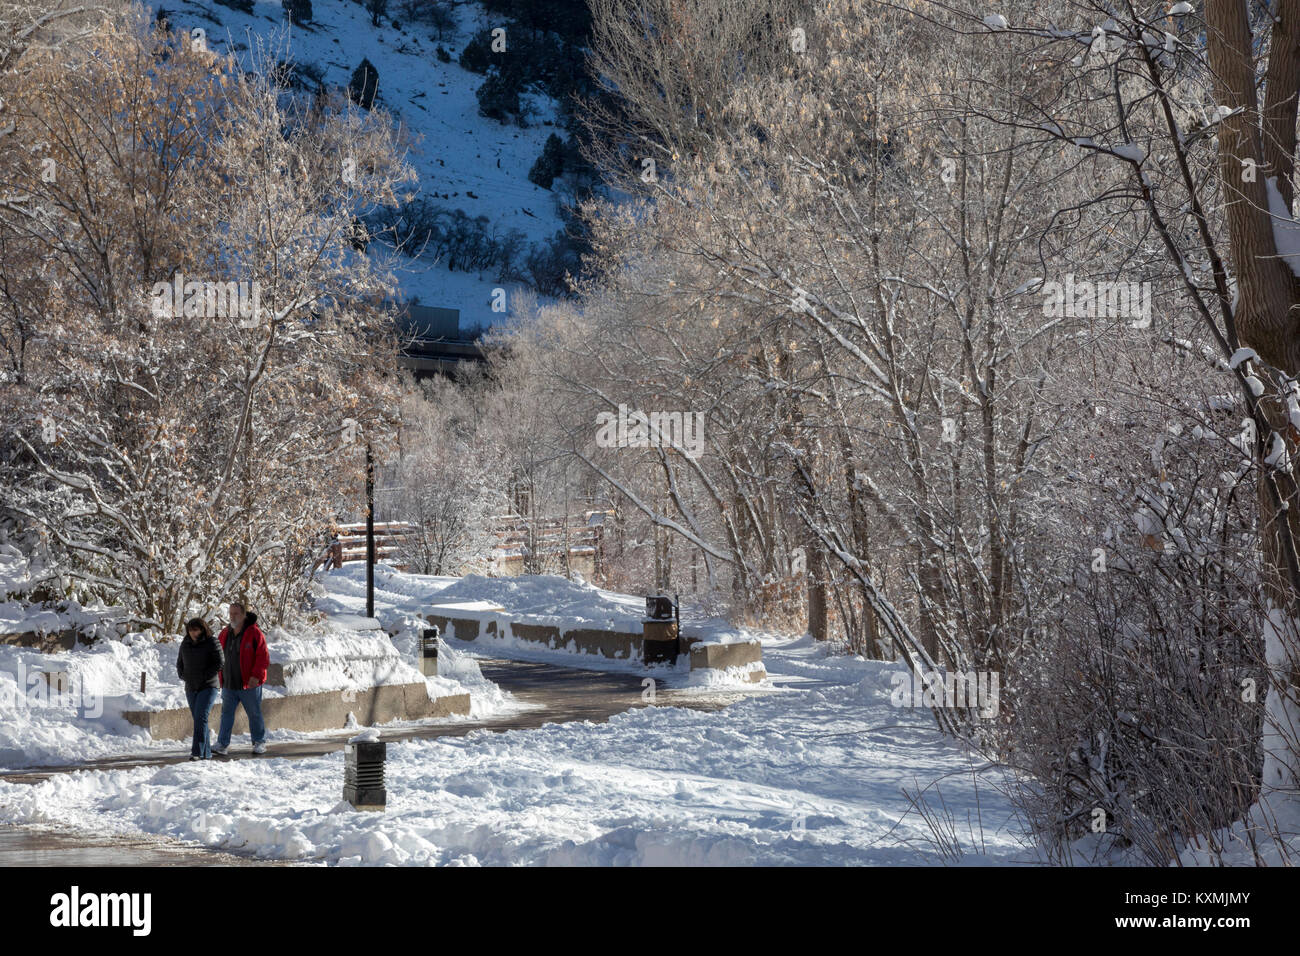 Glenwood Springs, Colorado - The Grizzly Creek rest stop on Interstate 70 in Glenwood Canyon. Stock Photo